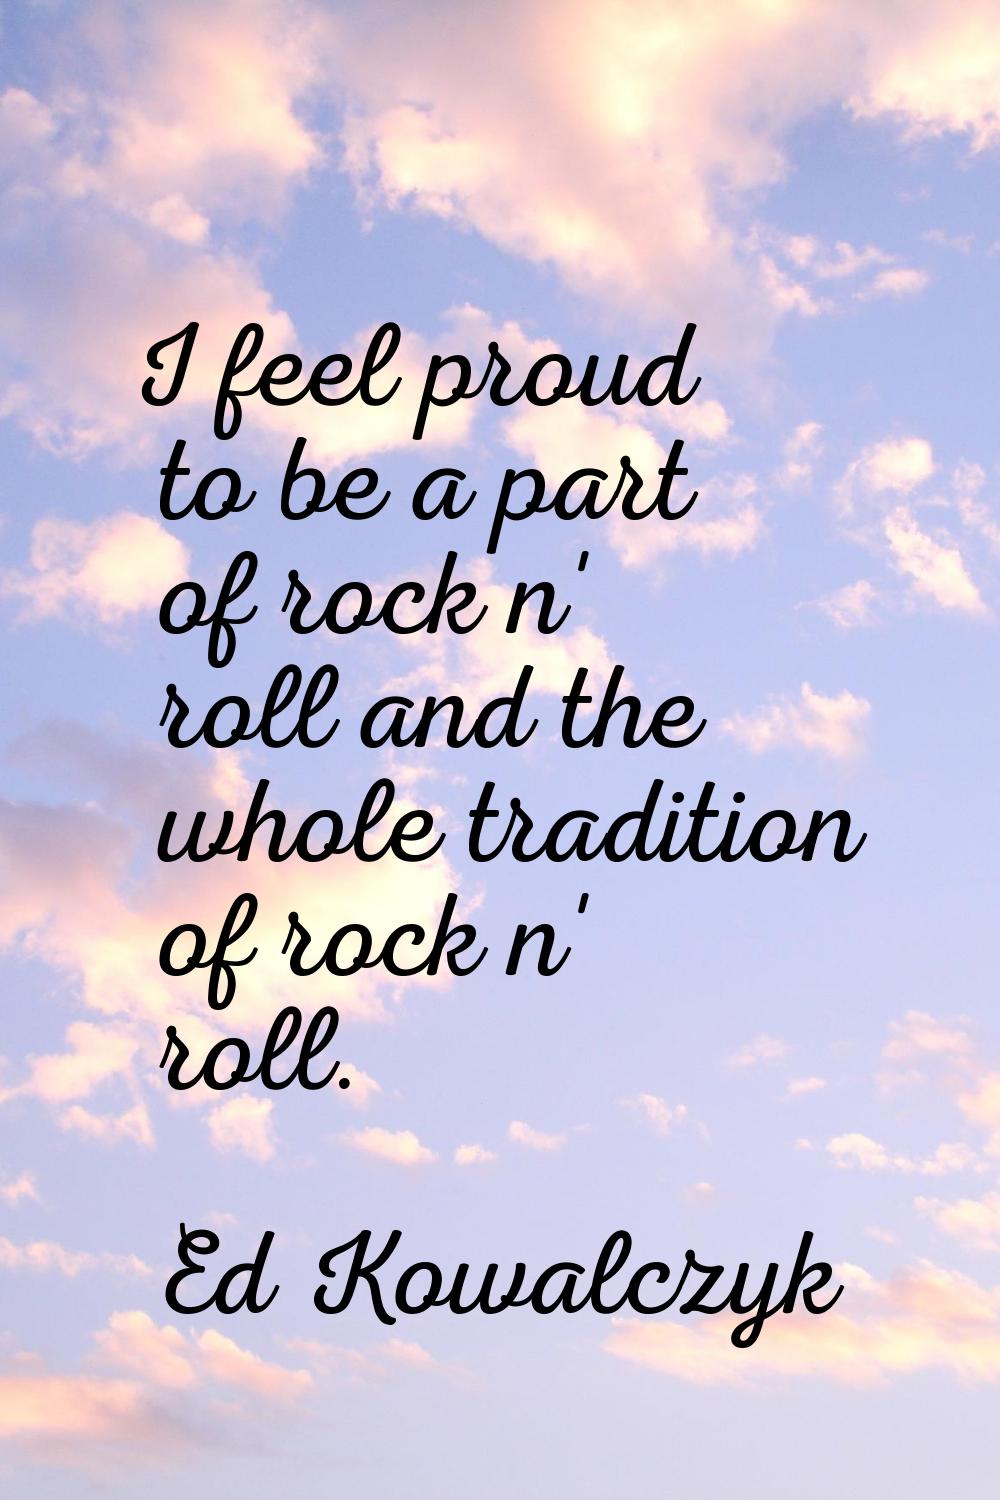 I feel proud to be a part of rock n' roll and the whole tradition of rock n' roll.